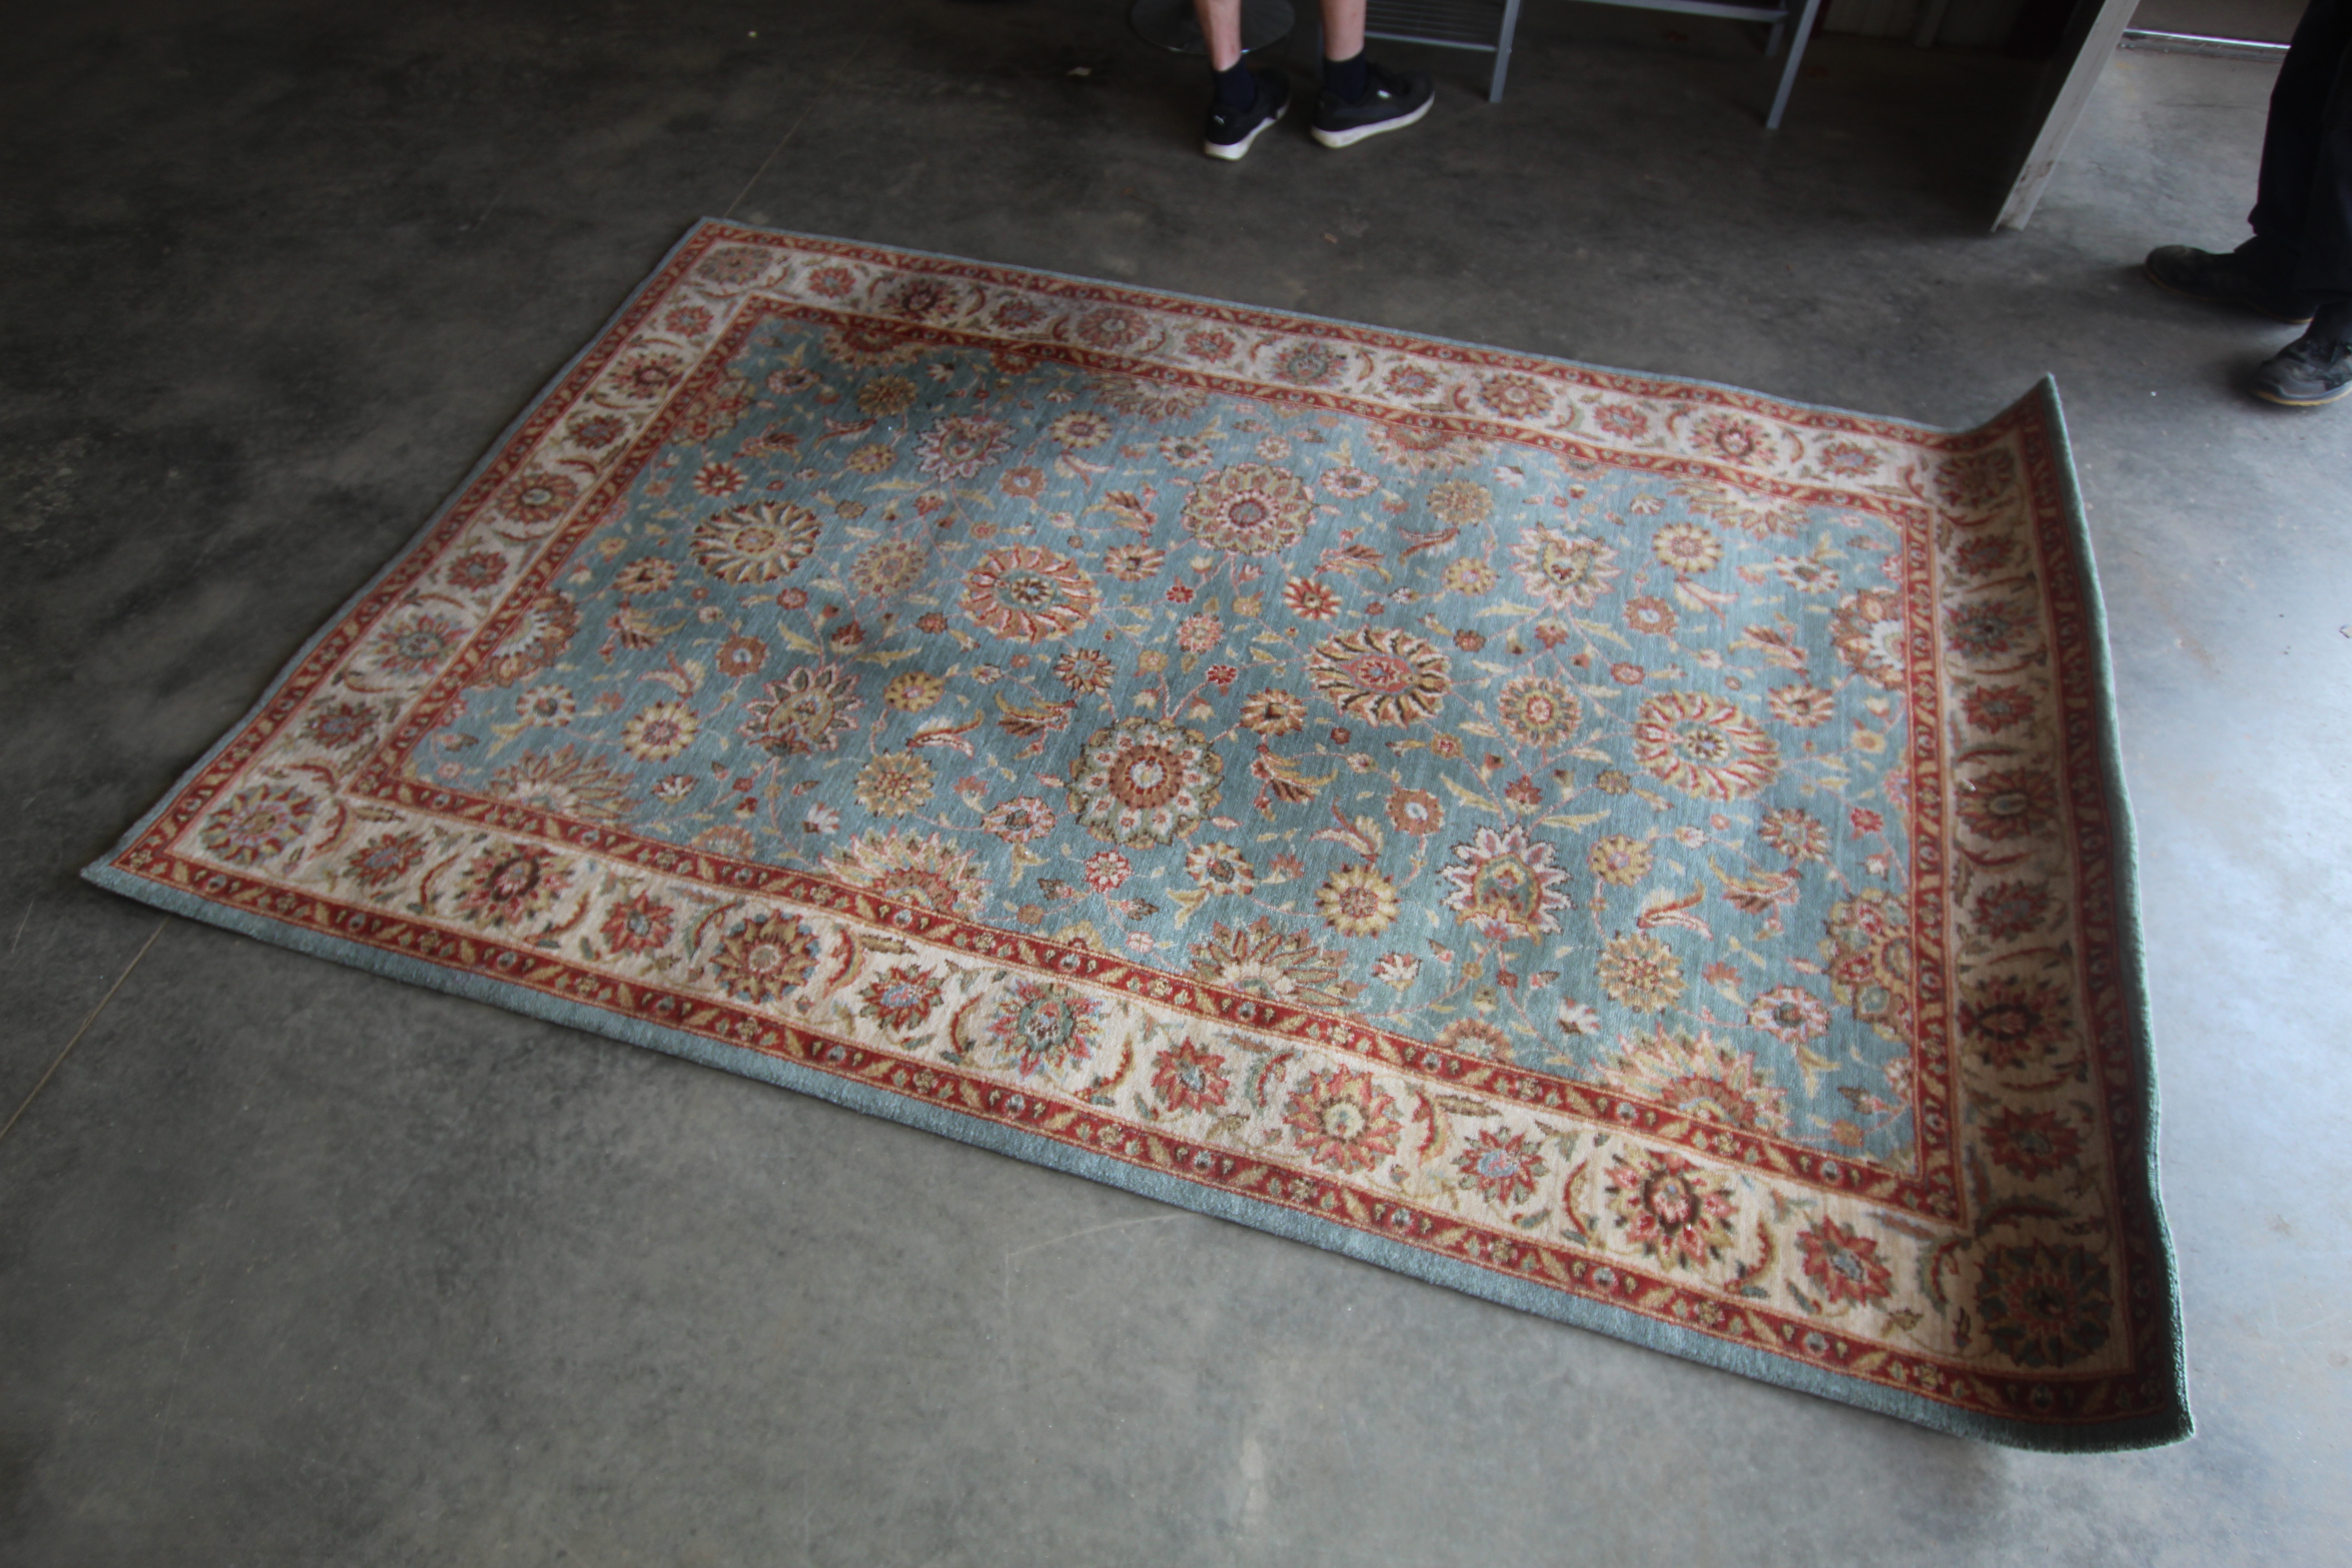 An approx. 8'3" x 5'5" floral patterned rug